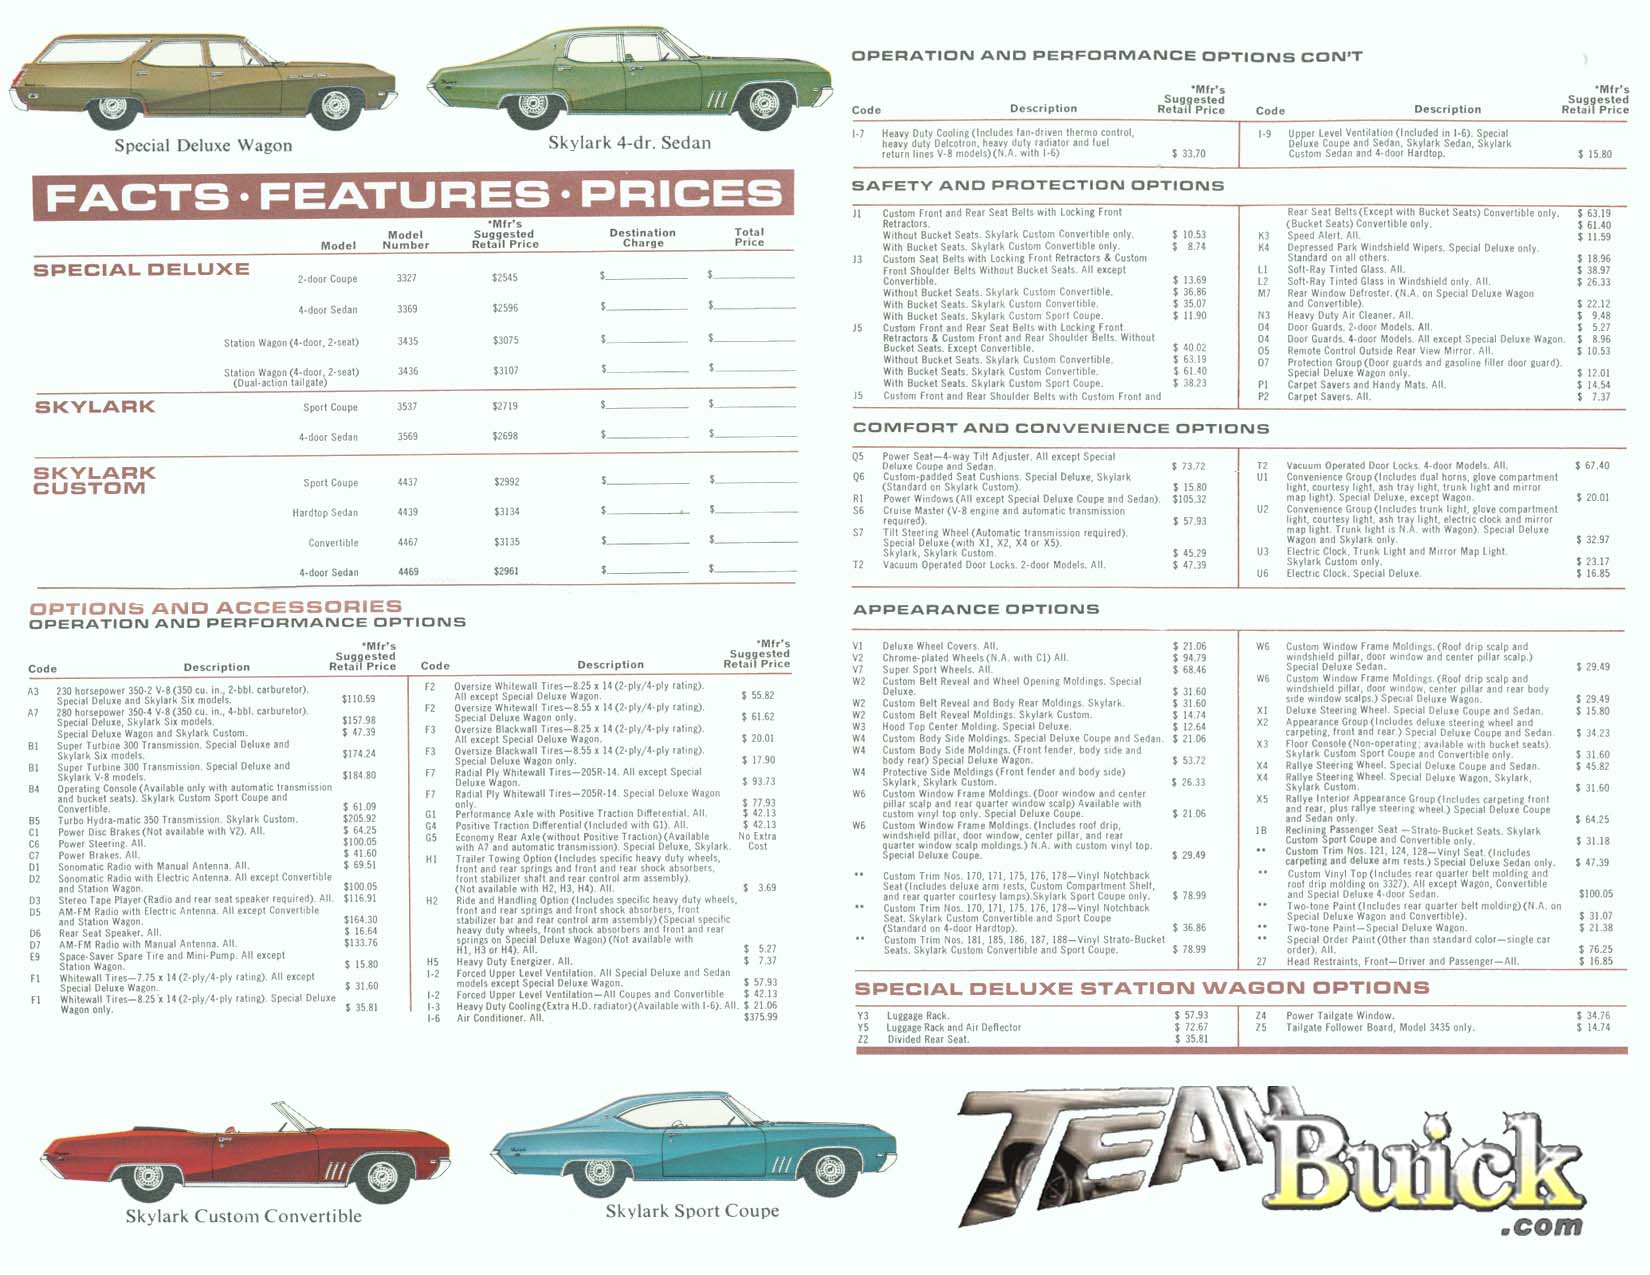 1969 Buick Deluxe Option Codes